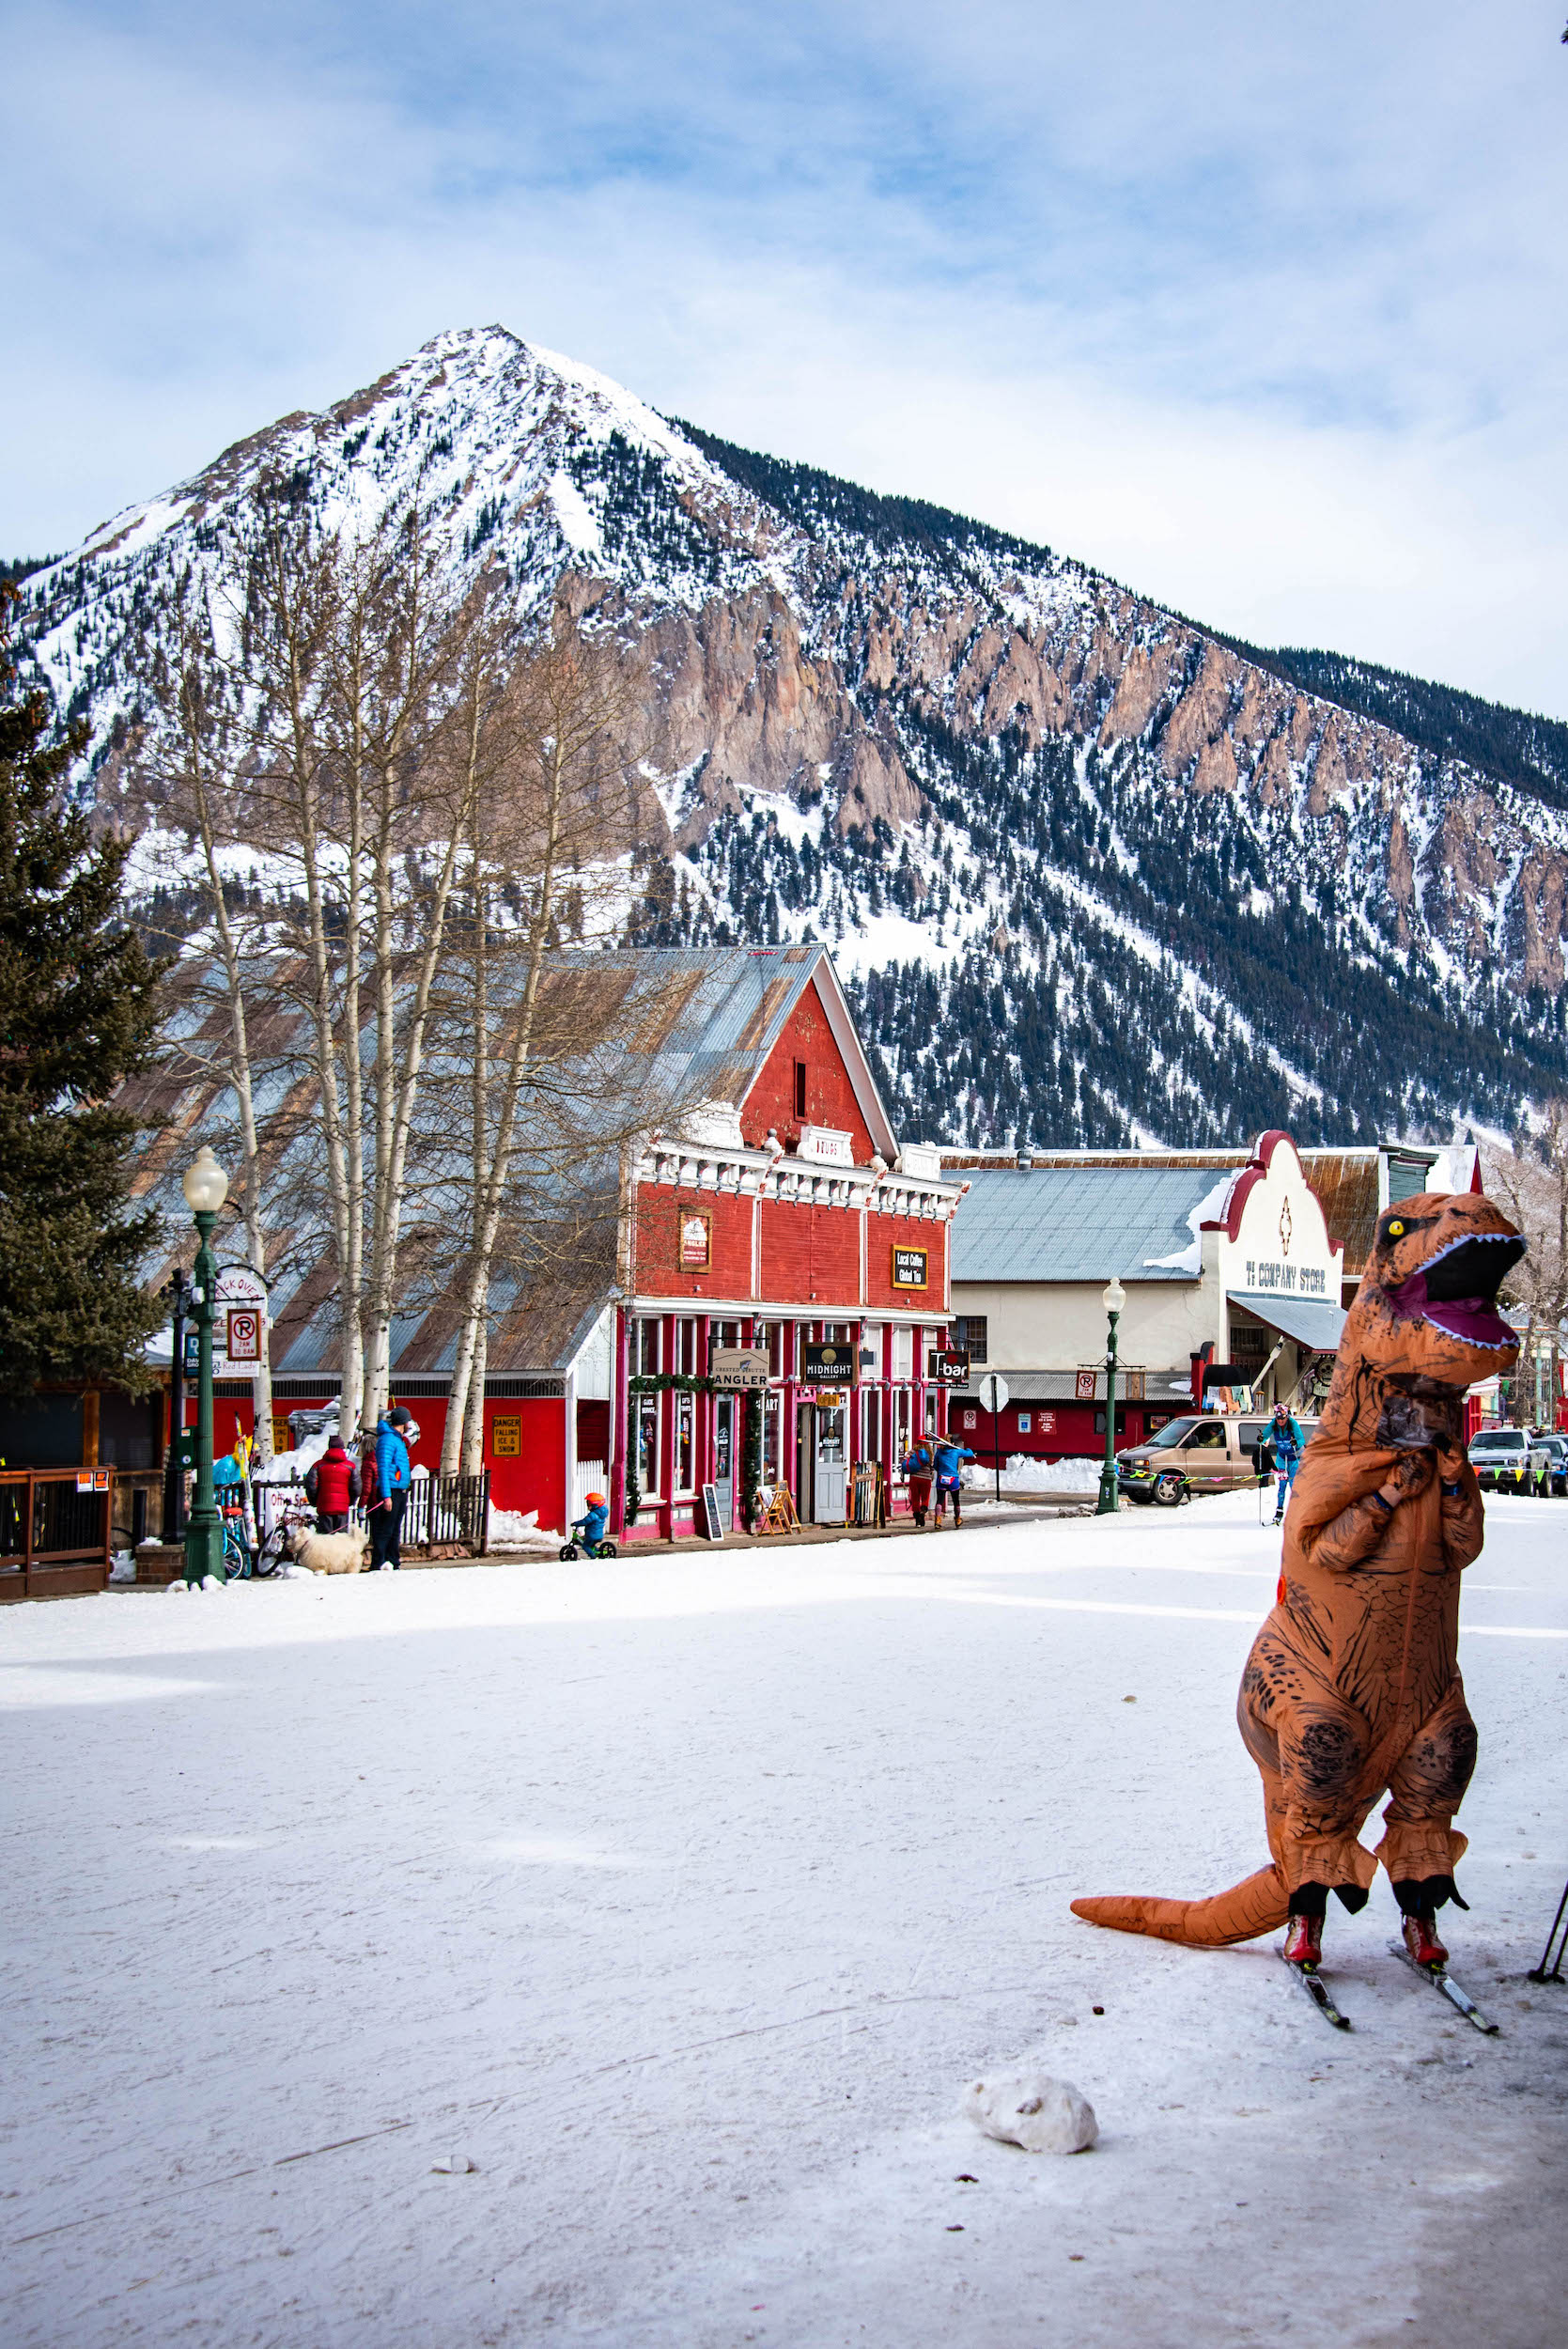 A person dressed in a dinosaur costume and wearing skis on a downtown street for the Crested Butte Alley Loop